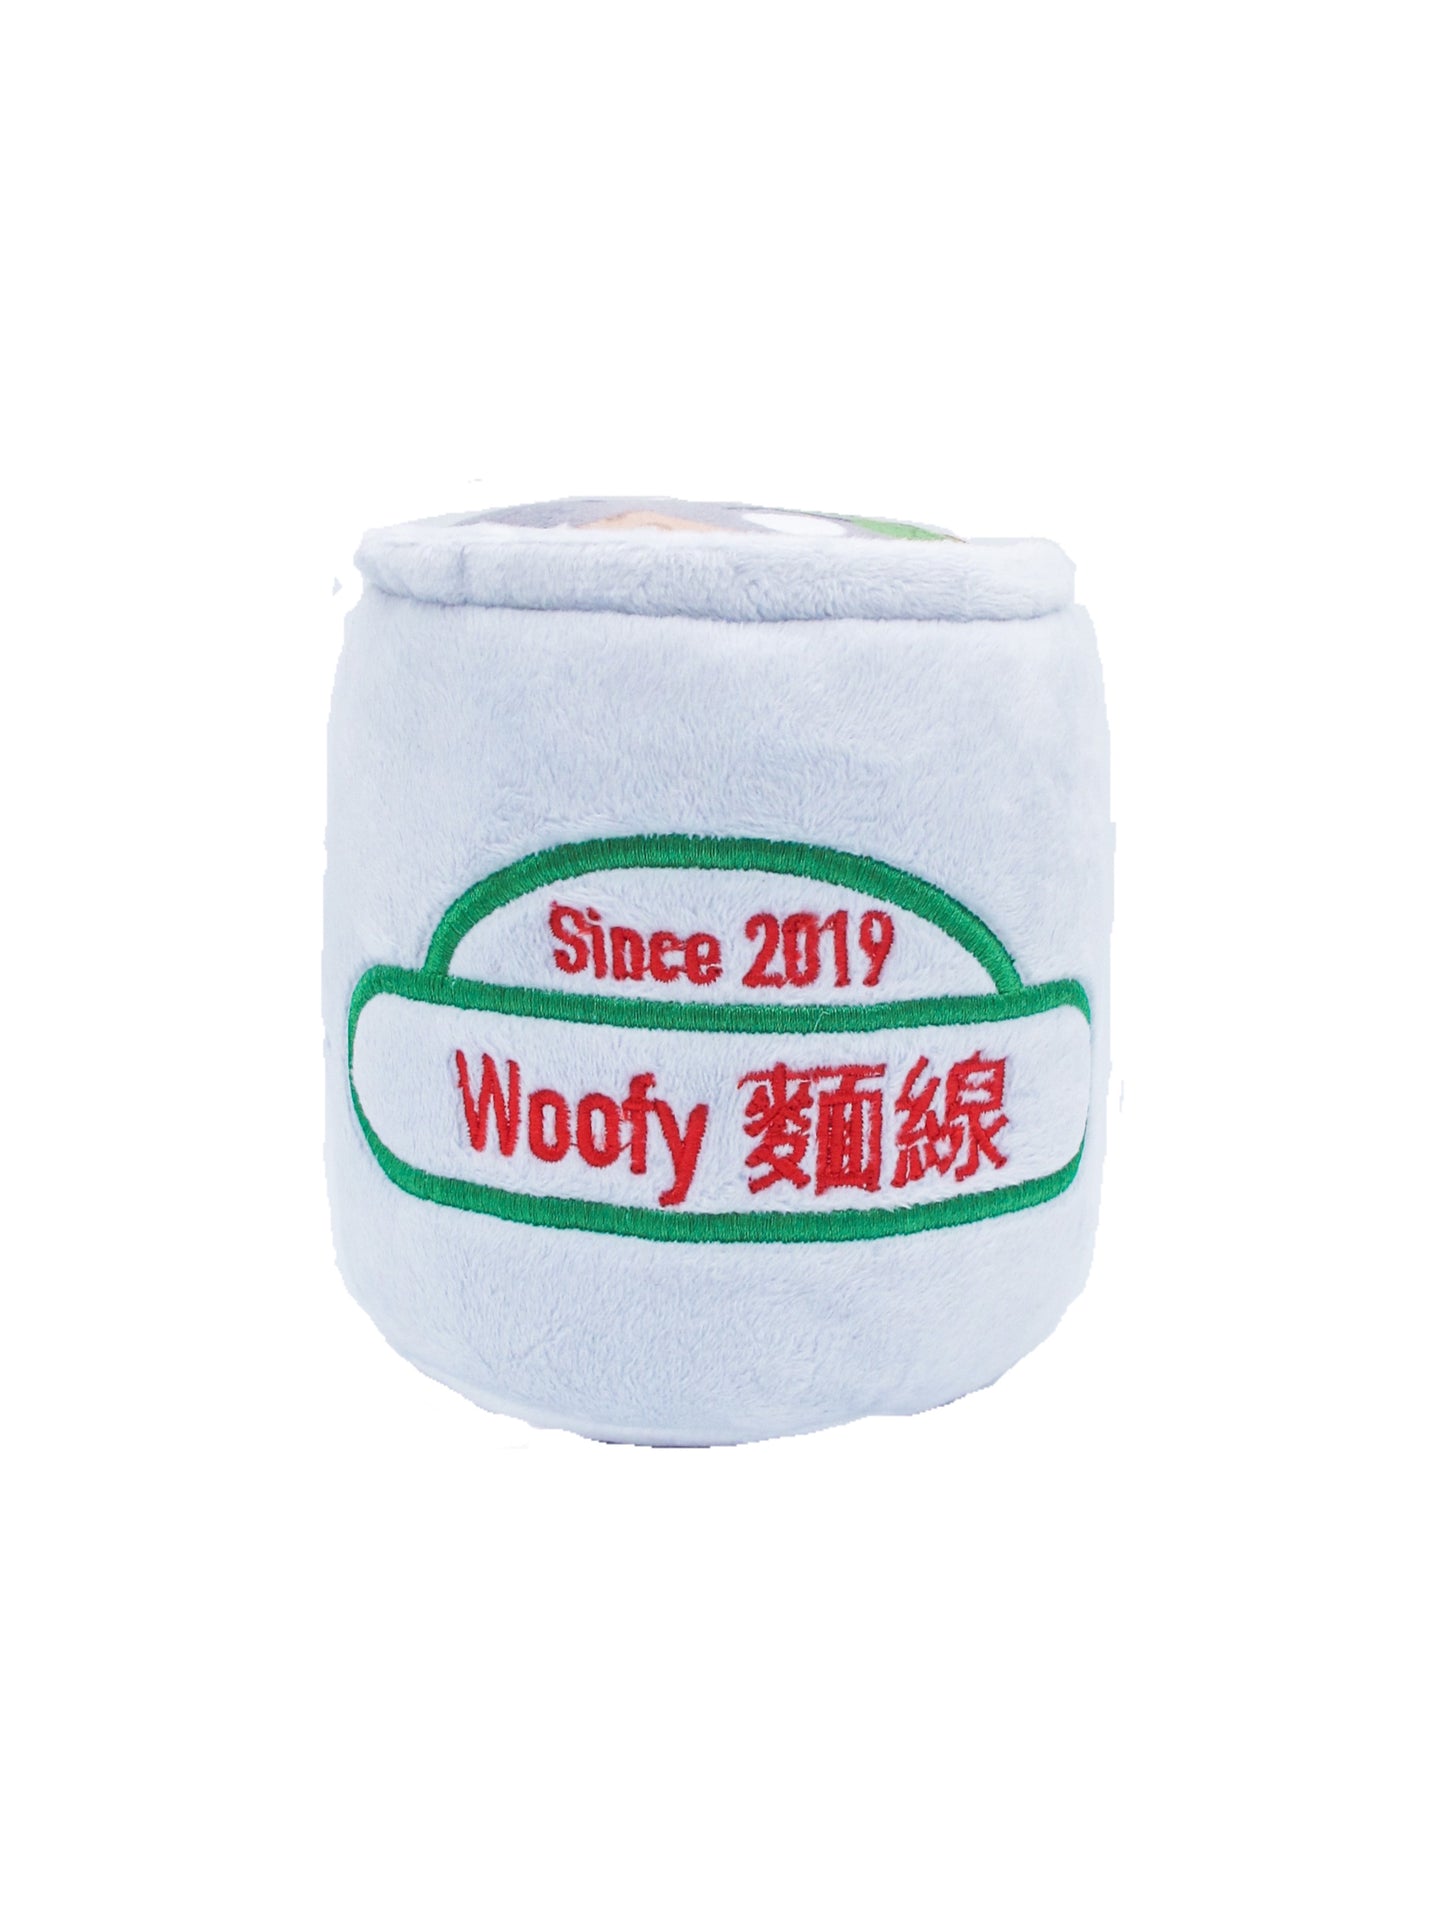 Woofy Oyster Mee Sua Nosework Set